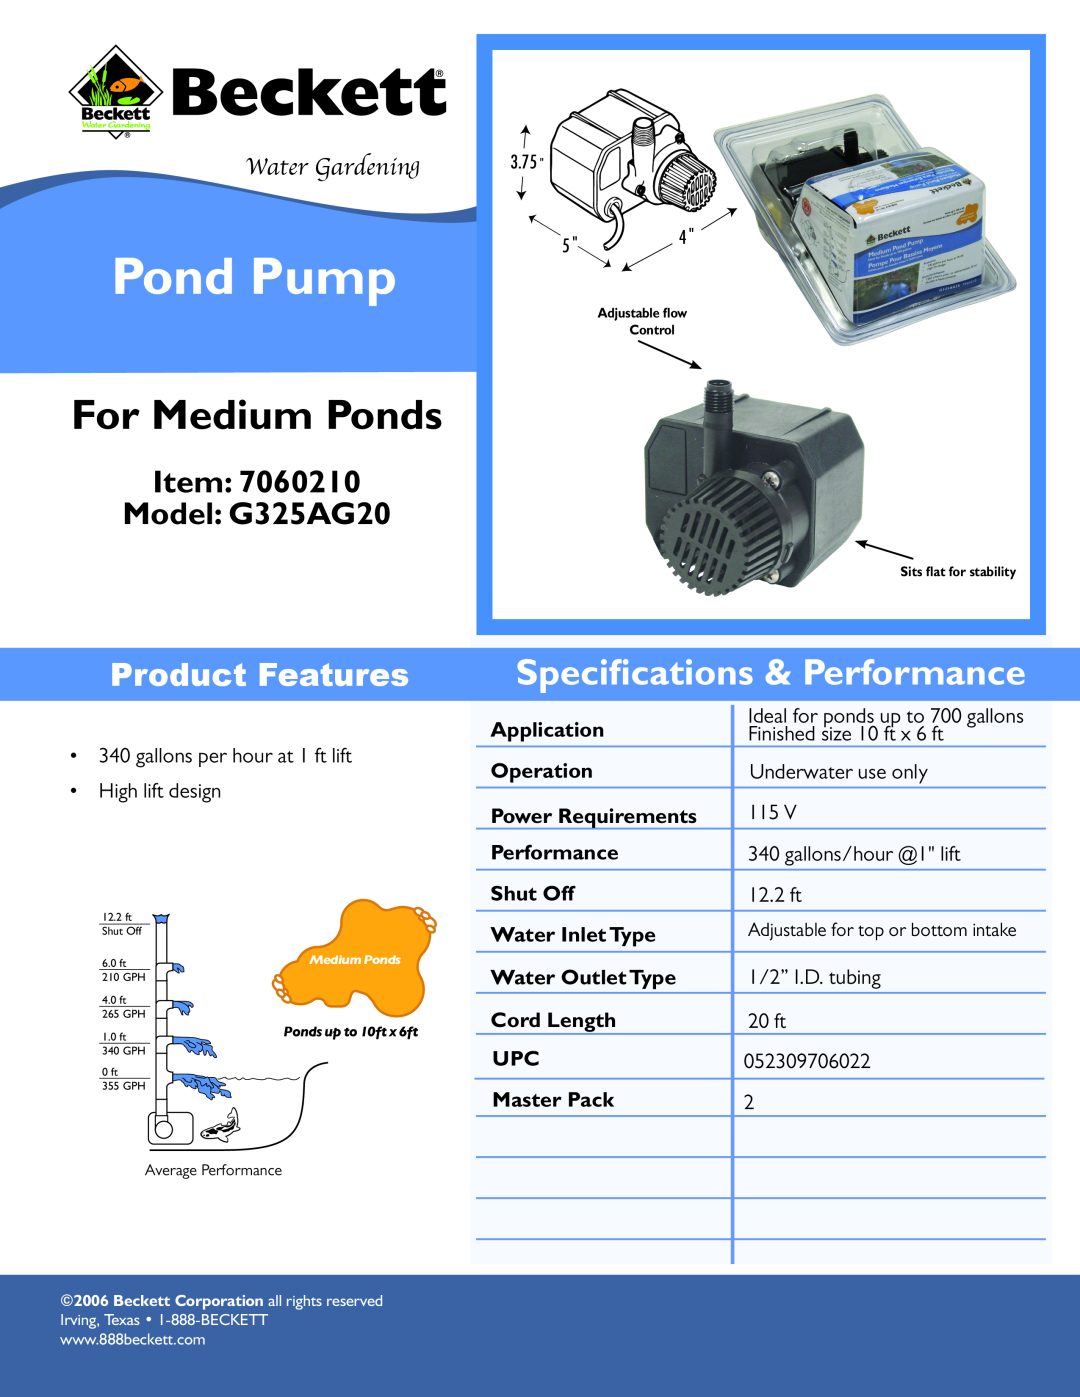 Beckett Water Gardening specifications Pond Pump, For Medium Ponds, Speciﬁcations & Performance, Model G325AG20 